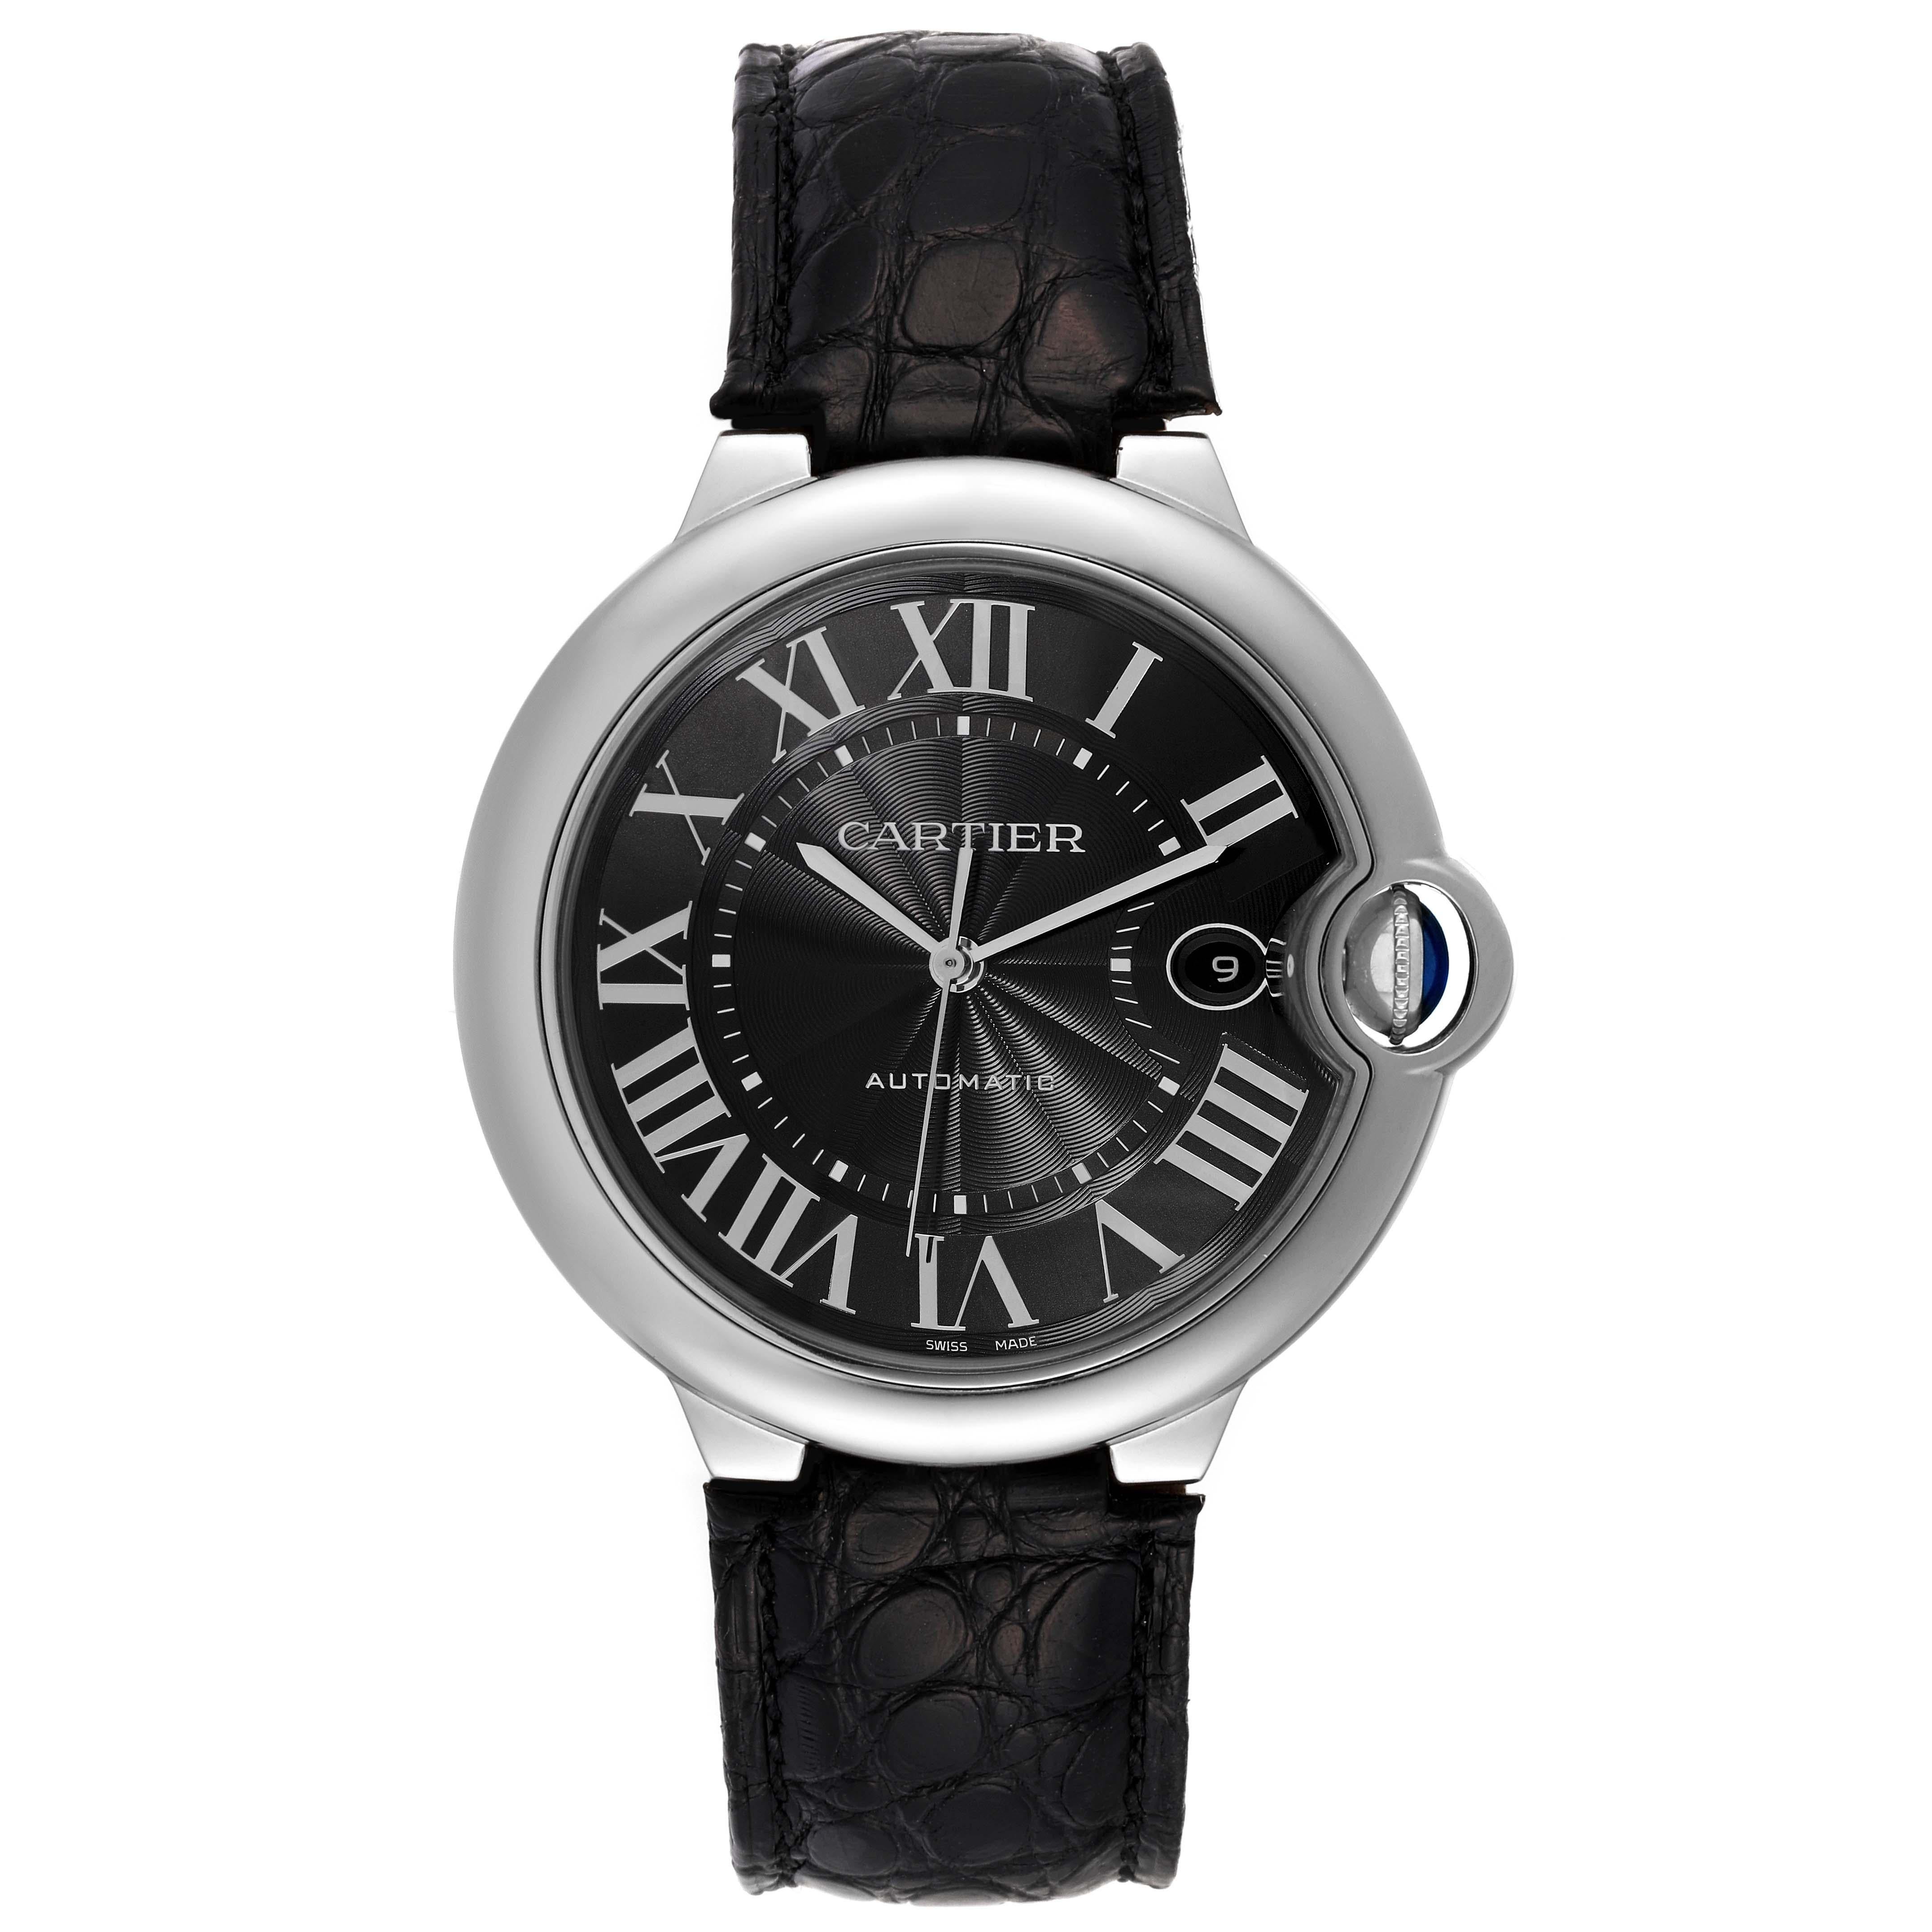 Cartier Ballon Bleu 42mm Black Dial Steel Mens Watch WSBB0003 Papers. Automatic self-winding movement. Round stainless steel case 42.1 mm in diameter, 13.03 mm thick. Fluted crown set with the blue spinel cabochon. Stainless steel smooth bezel.